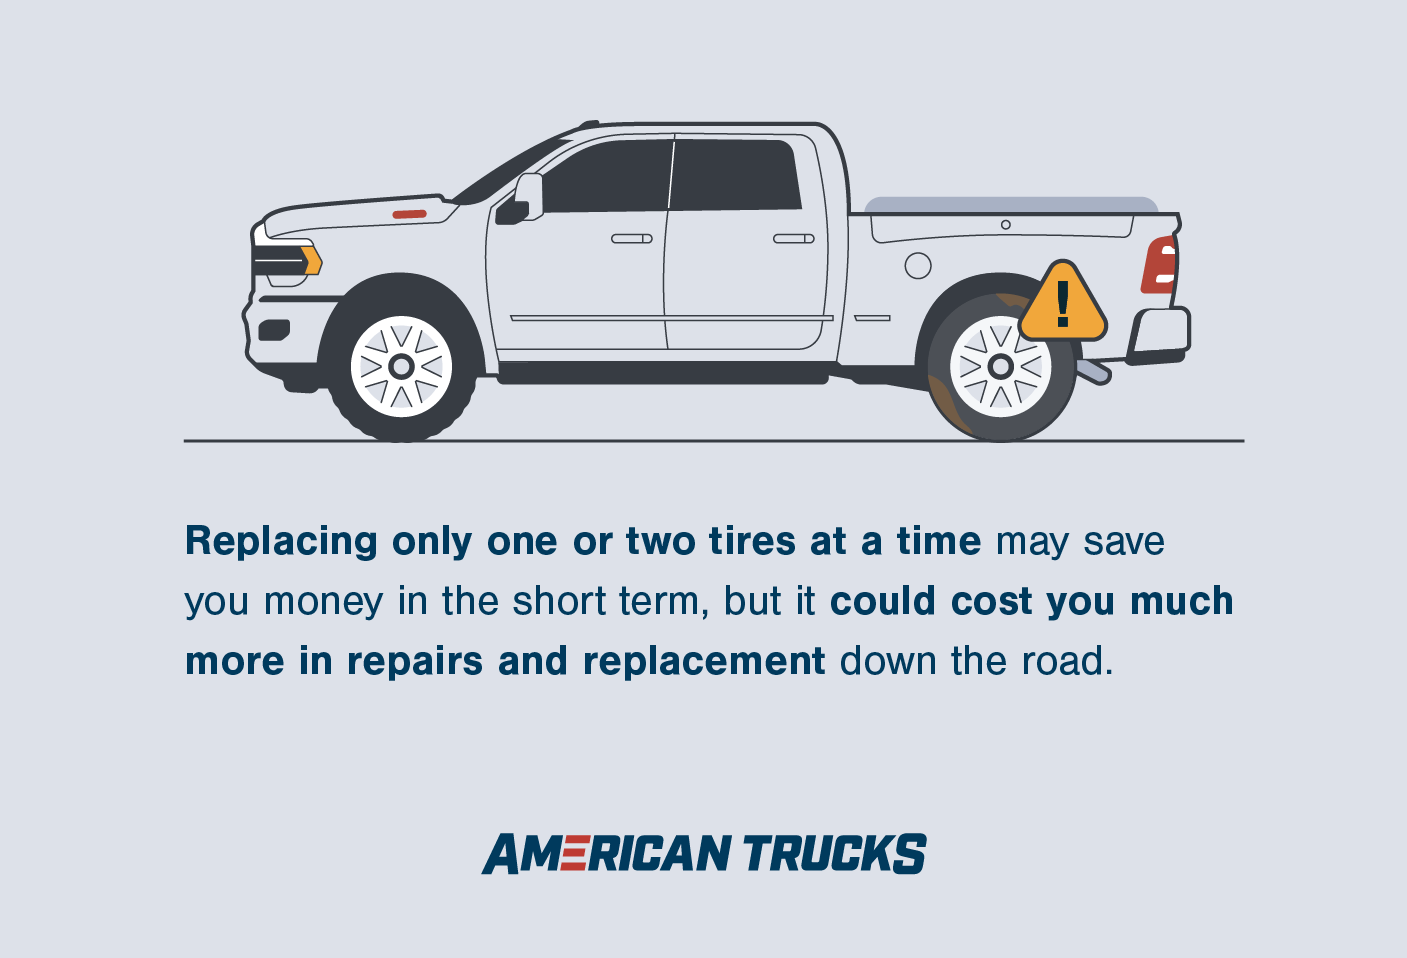 Graphic illustration of truck with an old set of tires on the rear axle stating that replacing only one or two tires at a time may save you money in the short term but could cost you more in repairs and replacement down the road.